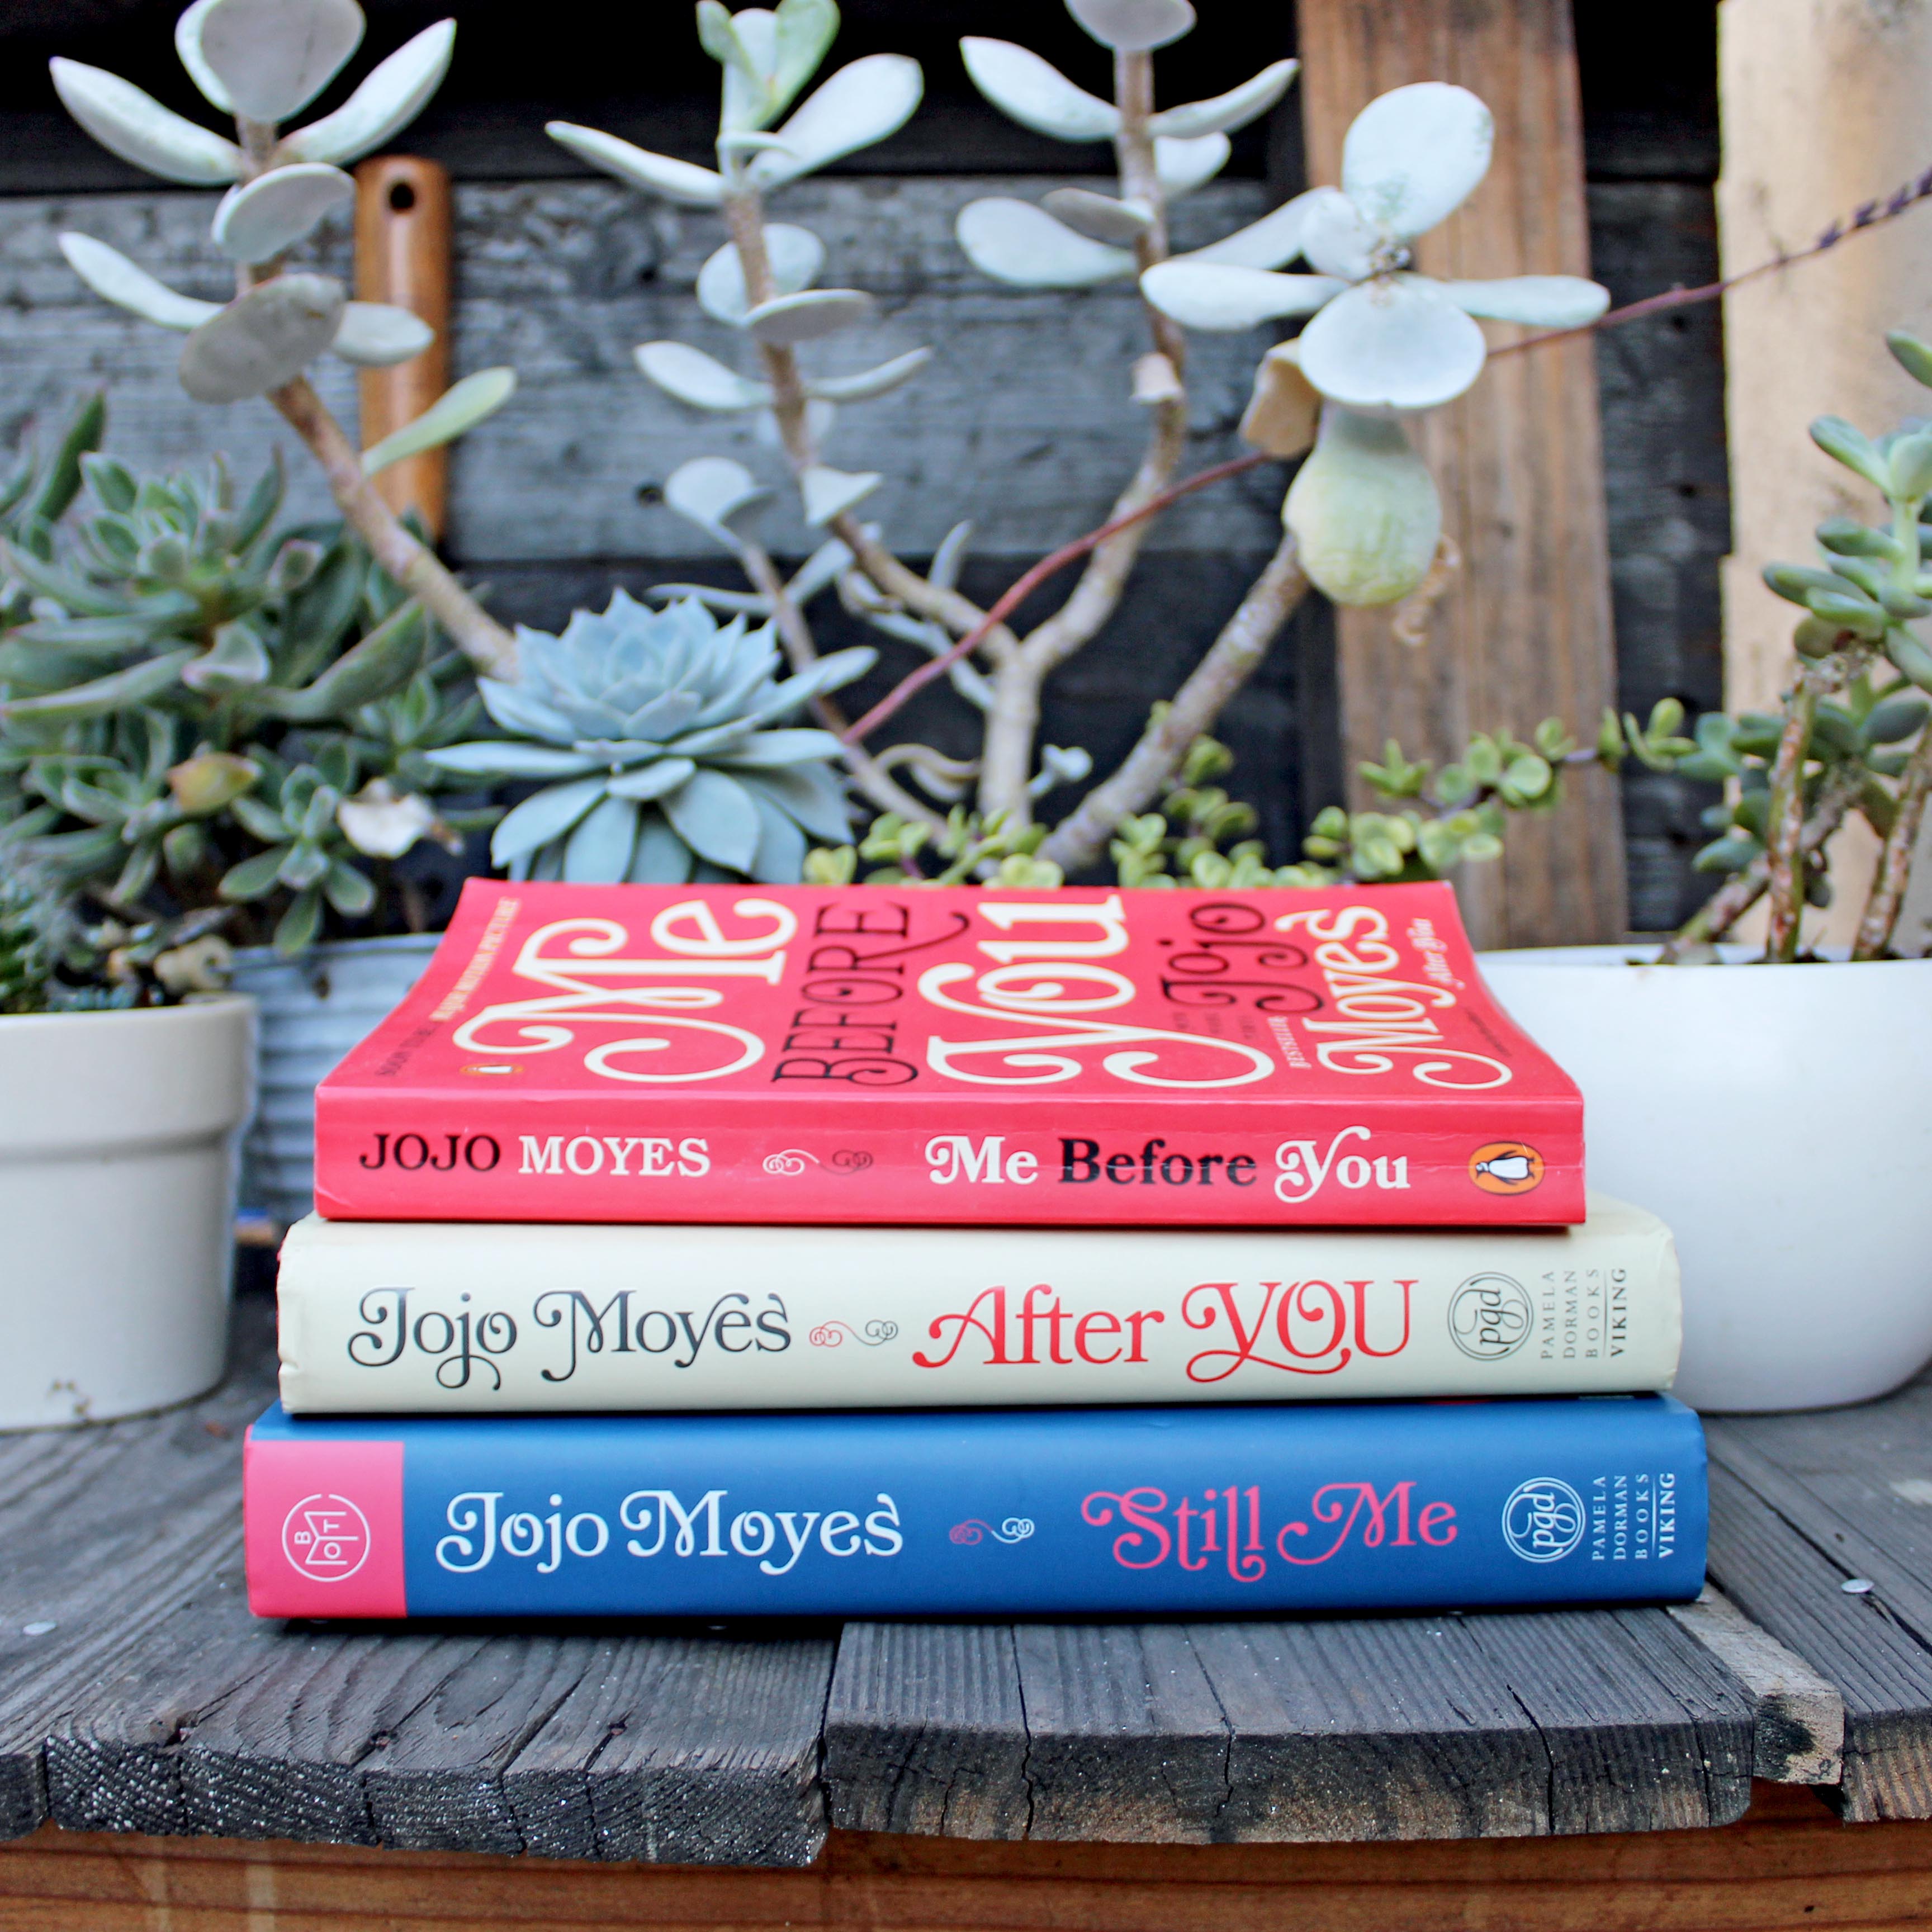 5 Favorite Sewing Projects & Reads "Me Before You/After You/Still Me"